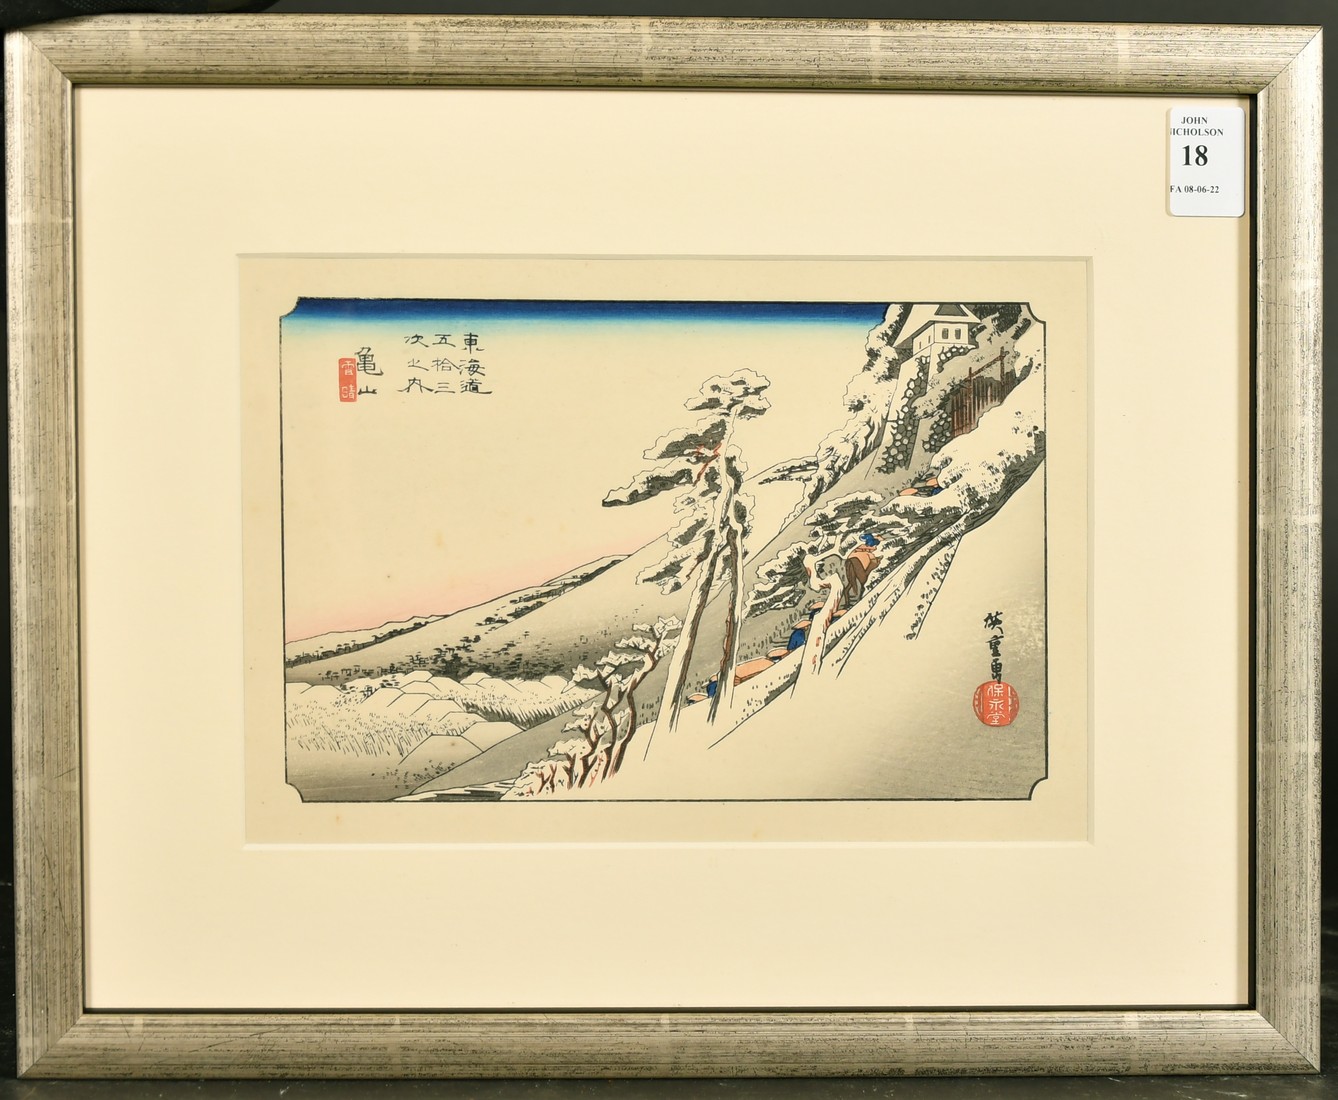 ANDO HIROSHIGE (1797-1858) Japan, figures carrying items up a snowy mountainside, woodcut, 6.5" x - Image 2 of 3